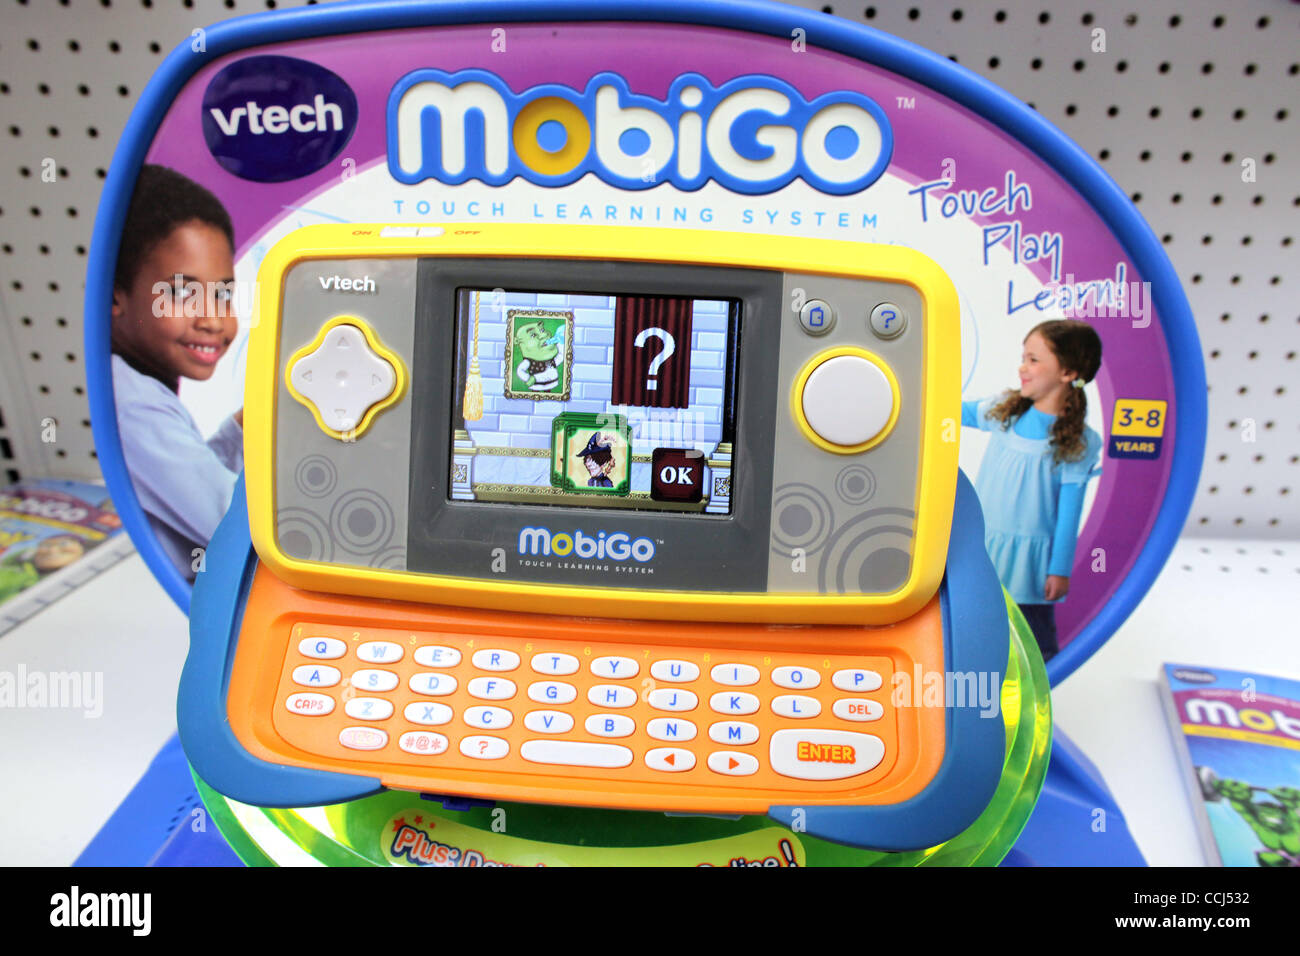 Dec 12, 2010 - Laguna Niguel, California, U.S. - MobiGo Touch Learning System. Another must-have on the kids' Christmas list is the MobiGo Touch. It looks like a cool hand-held video game, but it helps kids learn spelling, math and problem-solving. MobiGo Touch Learning System, also by V Tech, gives Stock Photo